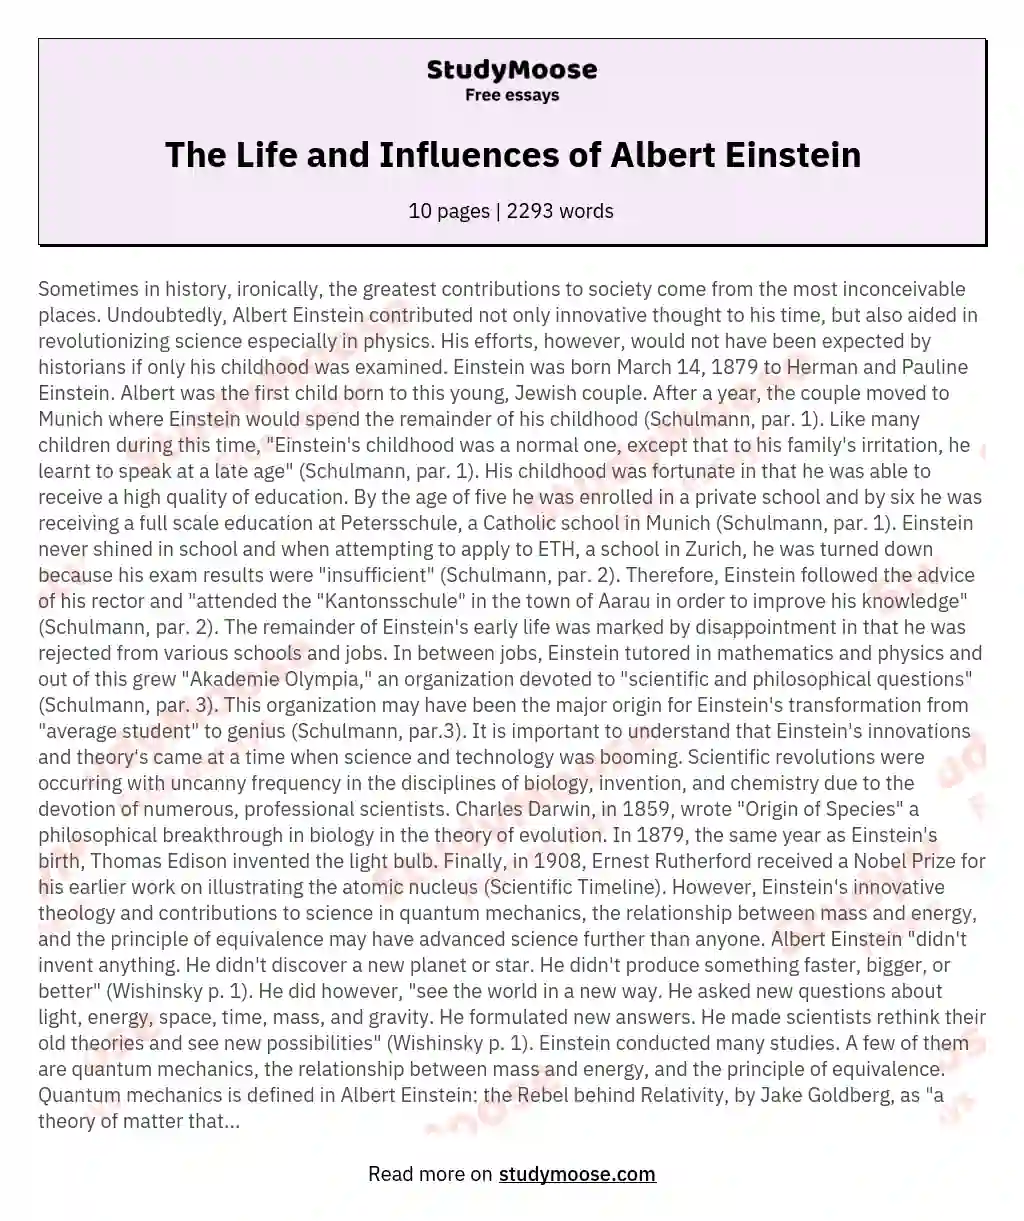 The Life and Influences of Albert Einstein